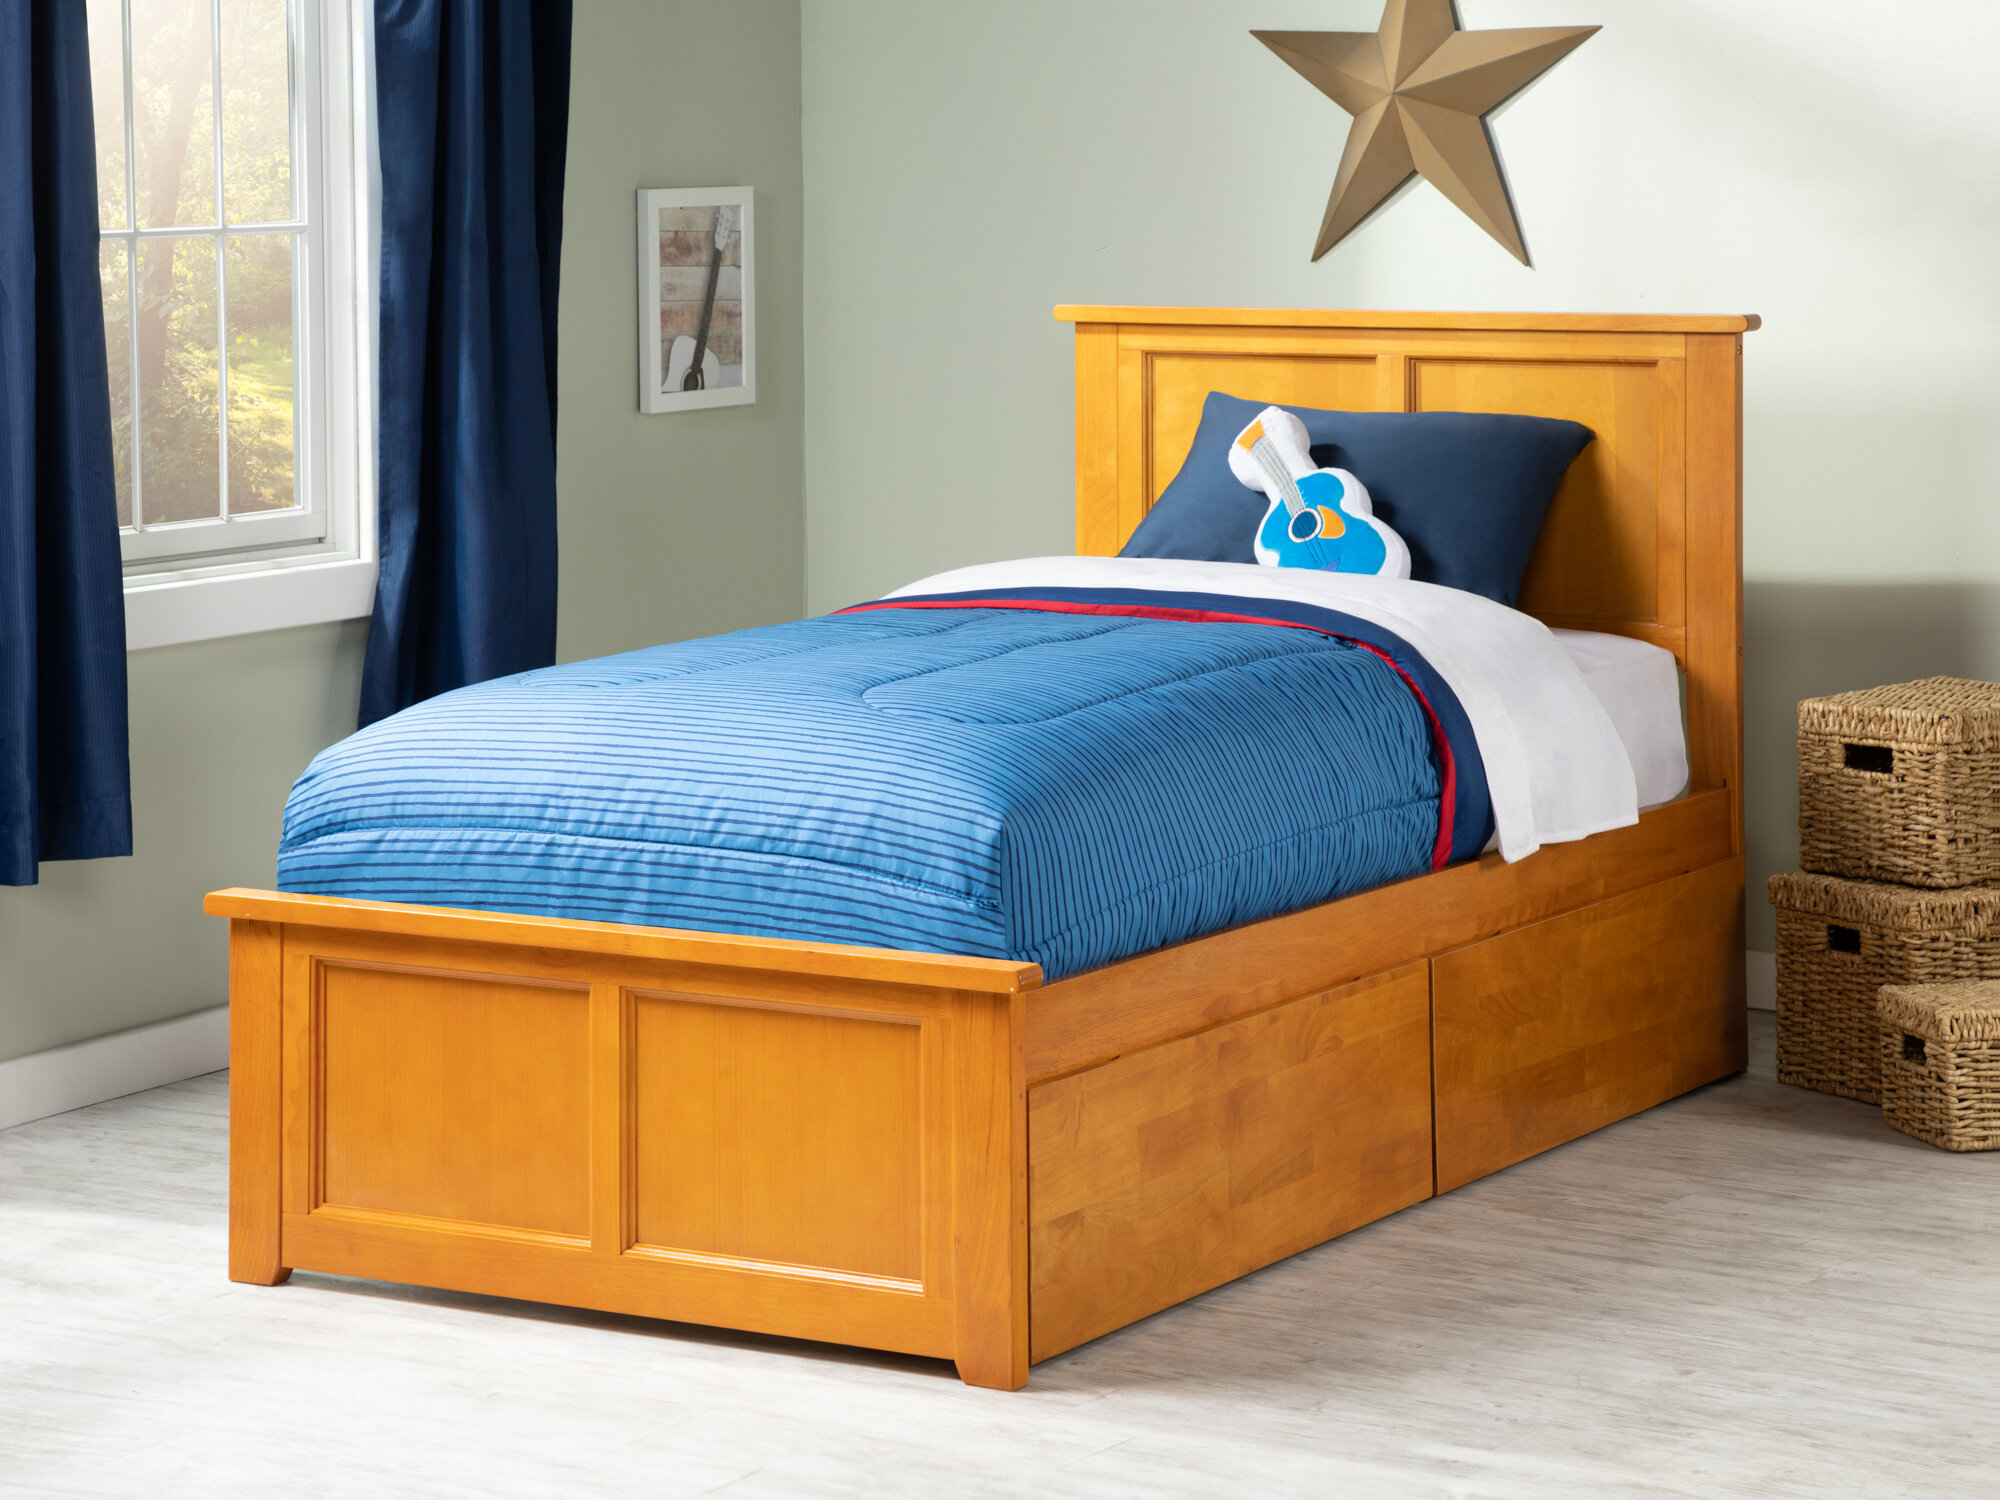 Twin Xl Bed Frame With Storage - Photos Cantik